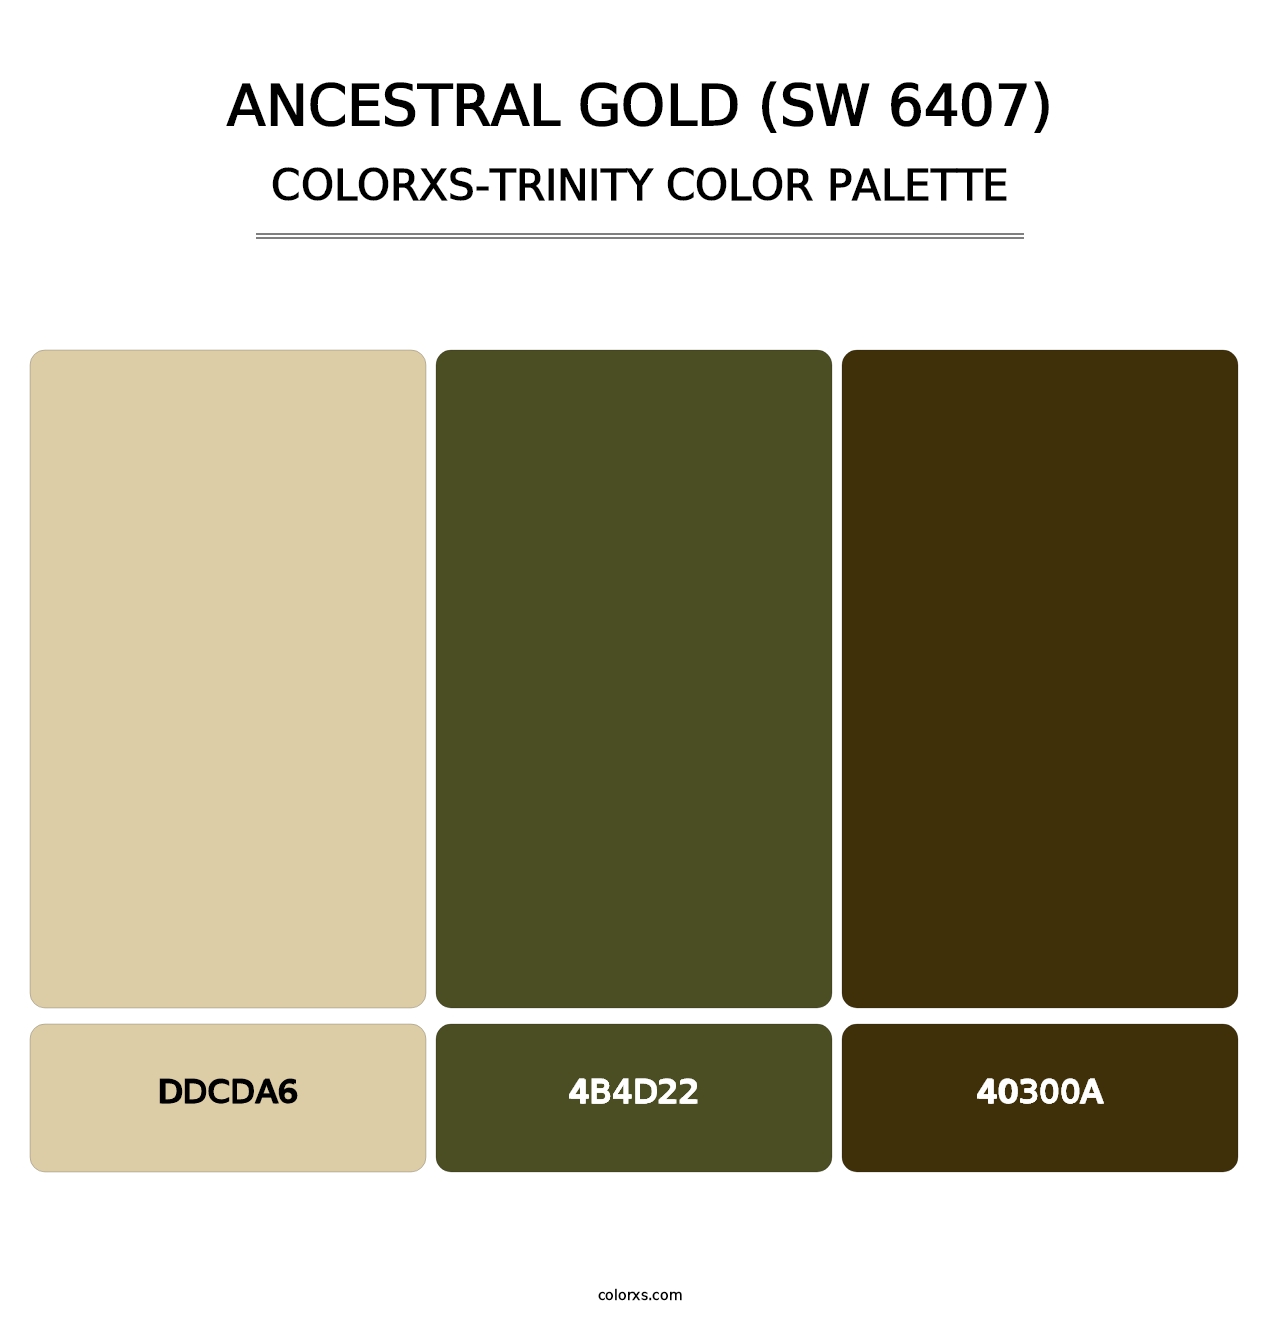 Ancestral Gold (SW 6407) - Colorxs Trinity Palette